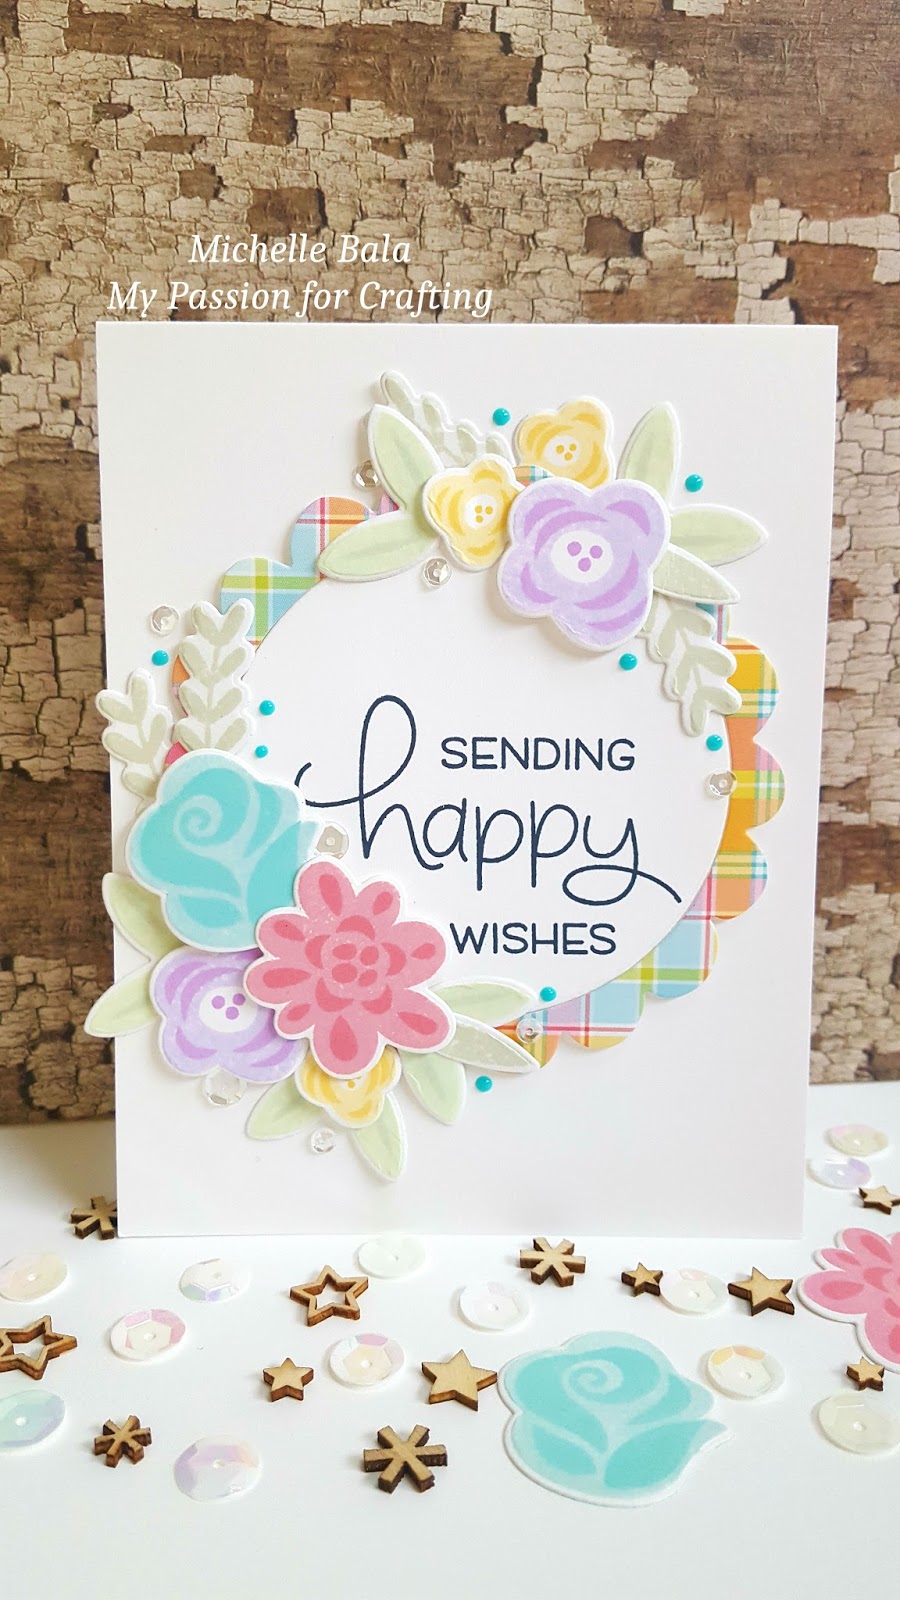 Sending Happy Wishes | My Passion for Crafting